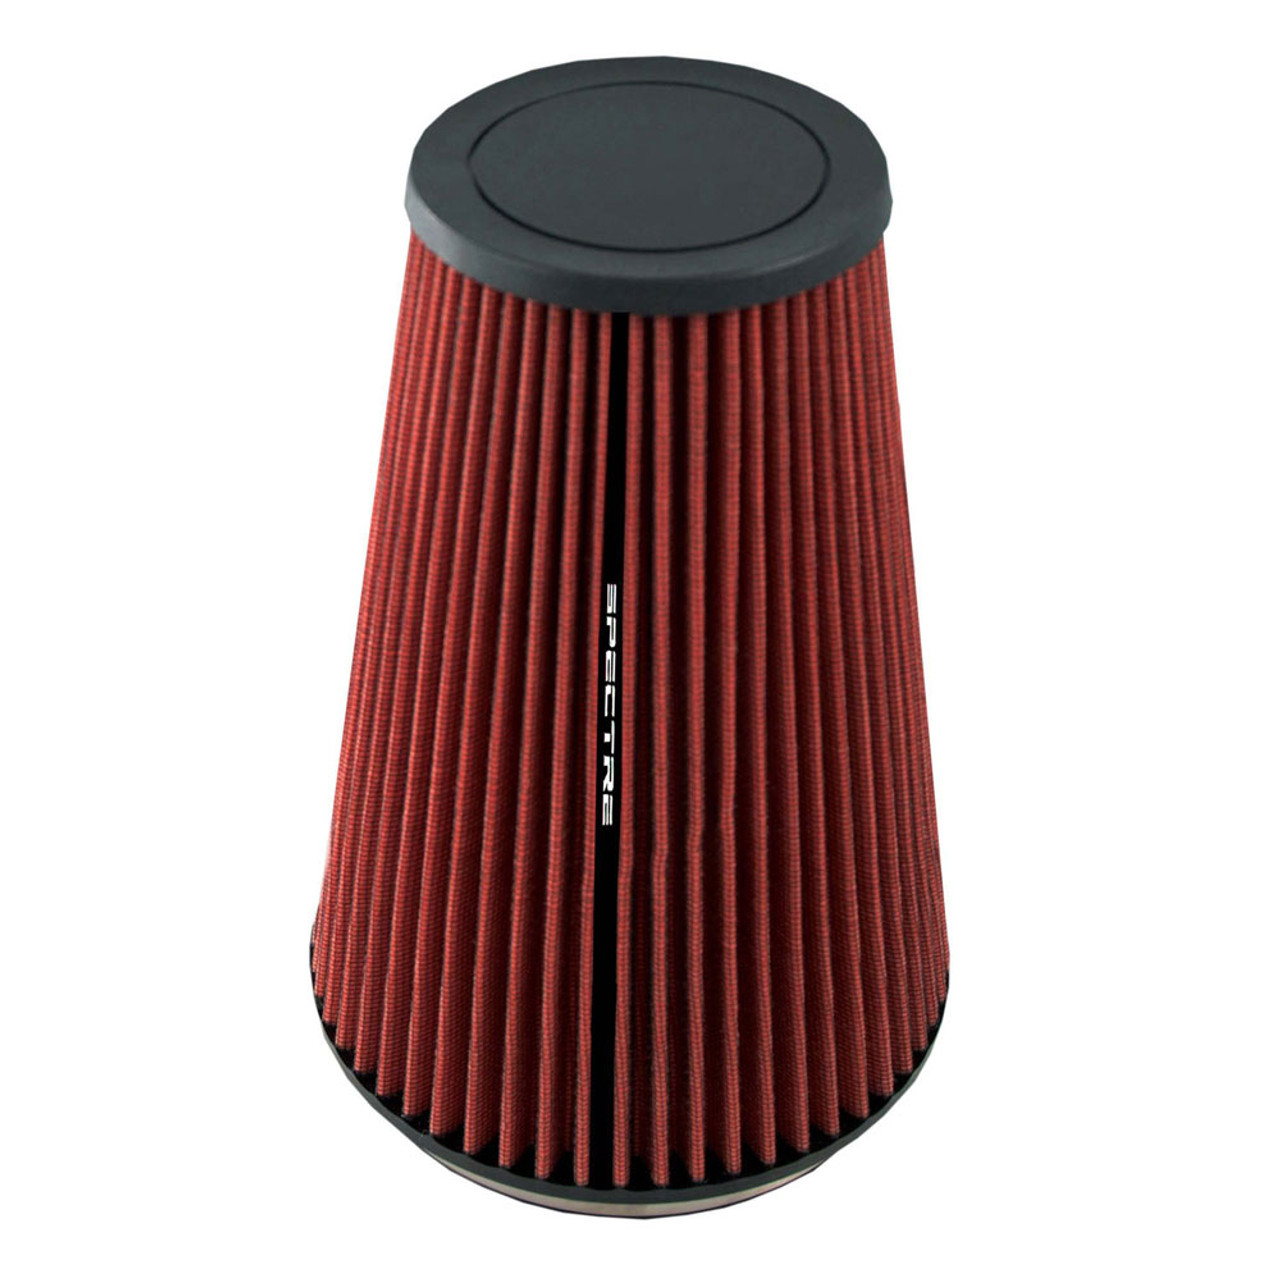 K&N 33-2970 High Performance Replacement Air Filter for 2009-2010 BMW 523I 3.0L L6 reikos_0019438425_tab01_3105 